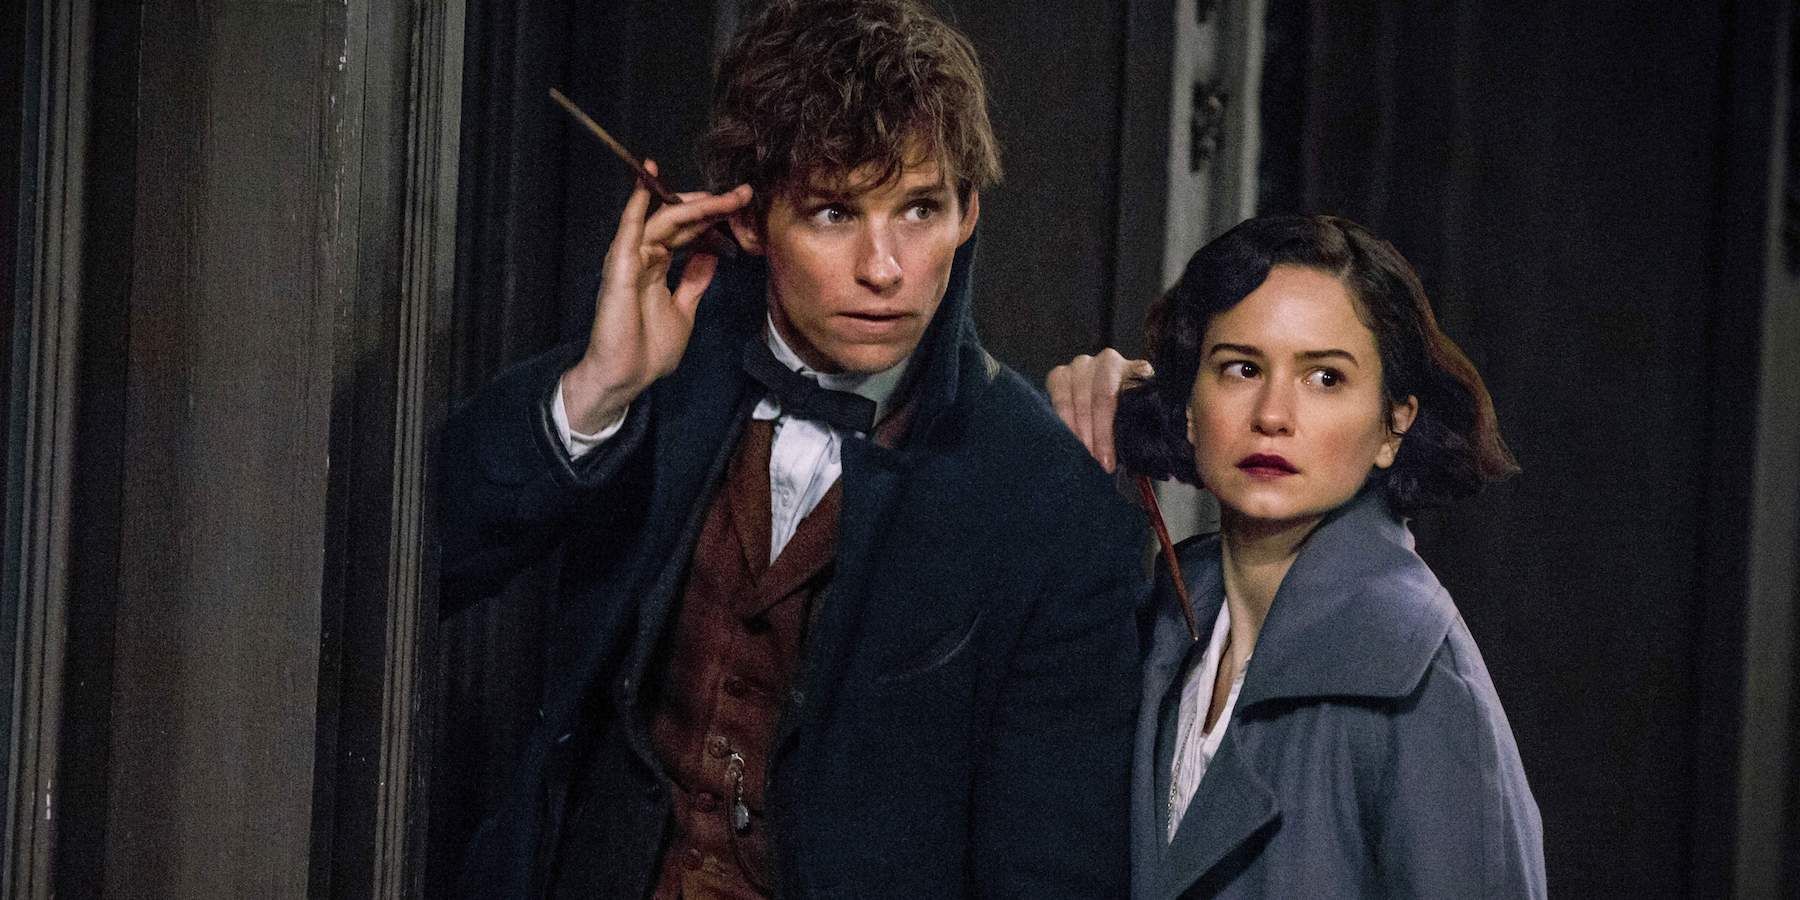 Katherine Waterston as Tina Goldstein in Fantastic Beasts and Where to Find Them